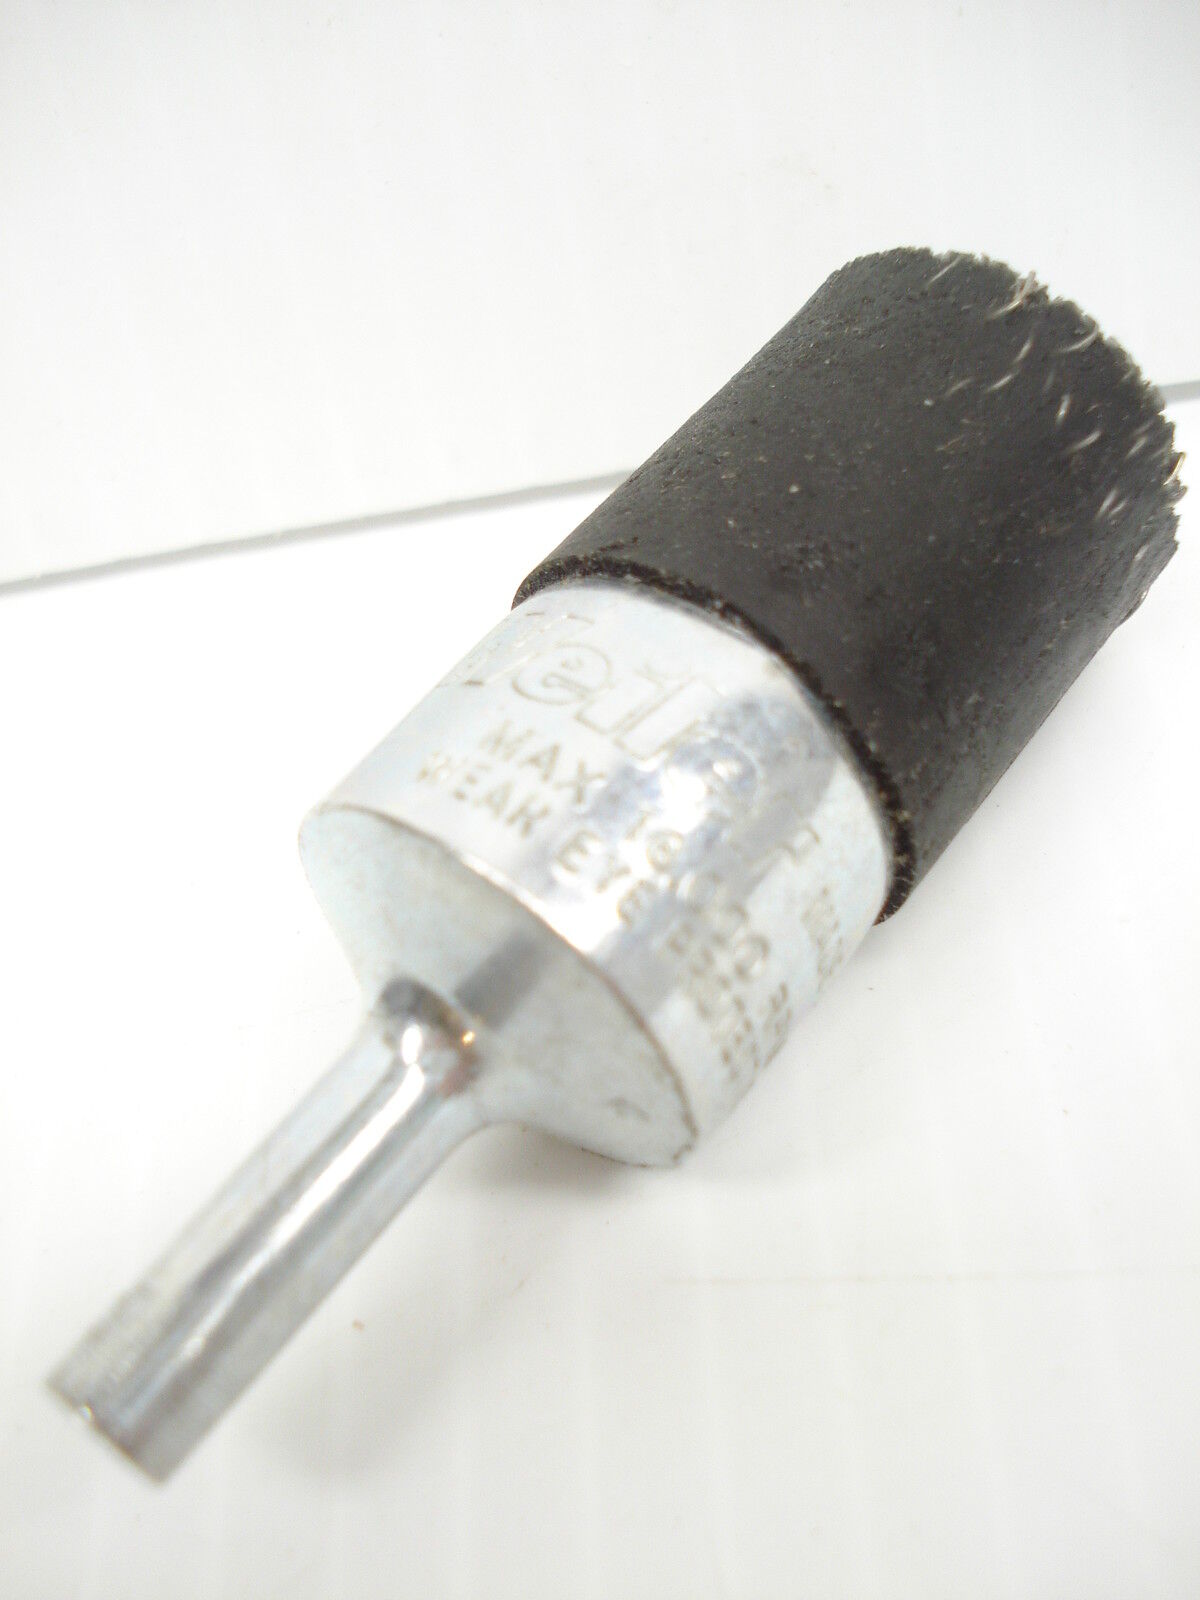 (1) WEILER 35584 PEBH-21 3/4" ENCAPSULATED WIRE END BRUSH